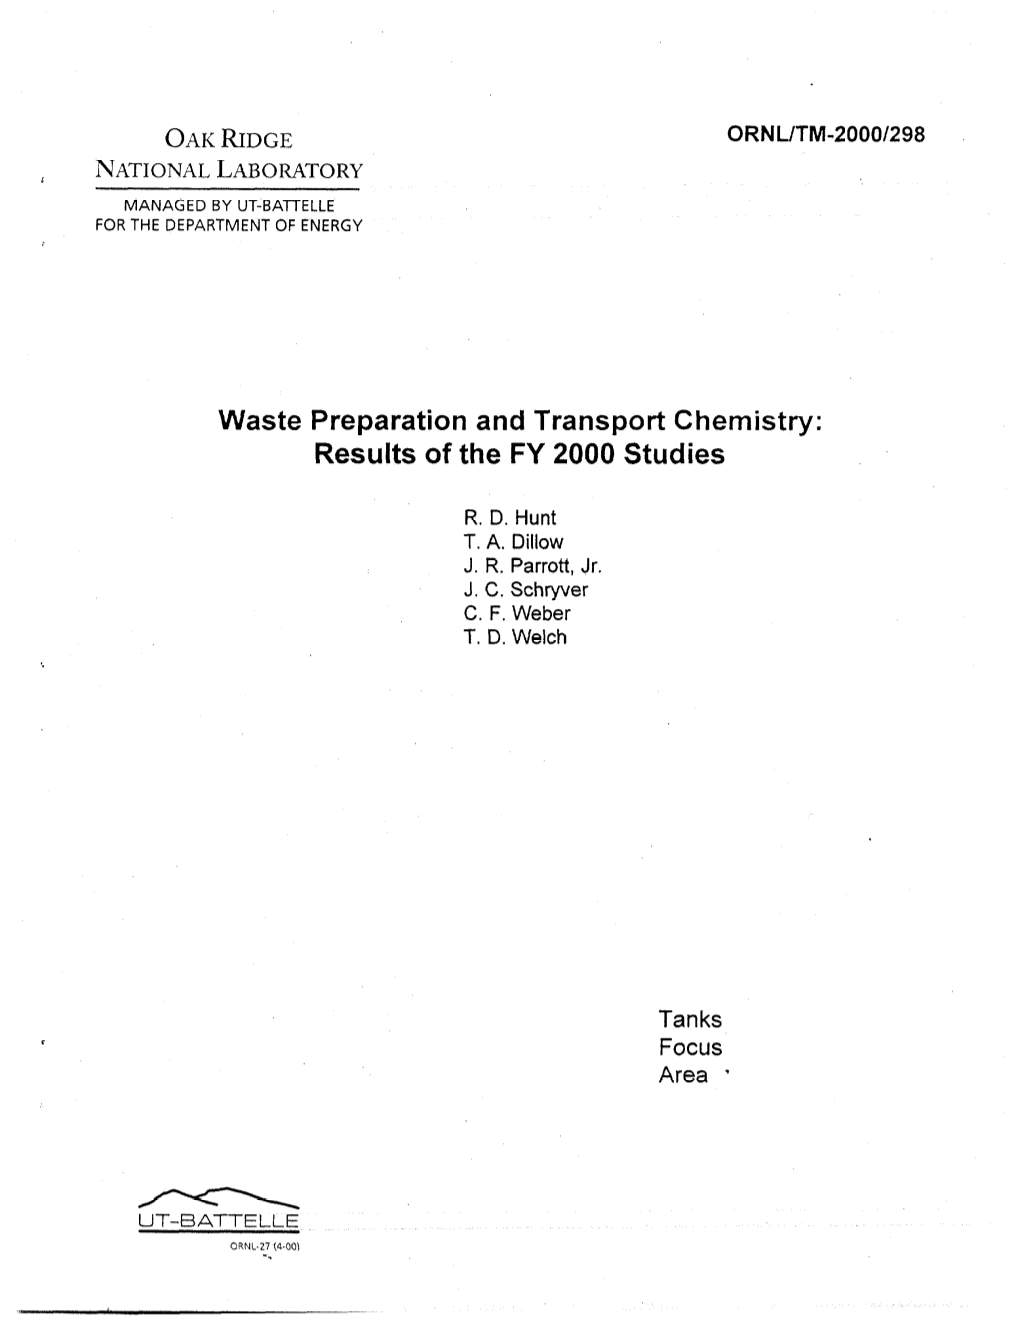 Waste Preparation and Transport Chemistry: Results of the FY 2000 Studies